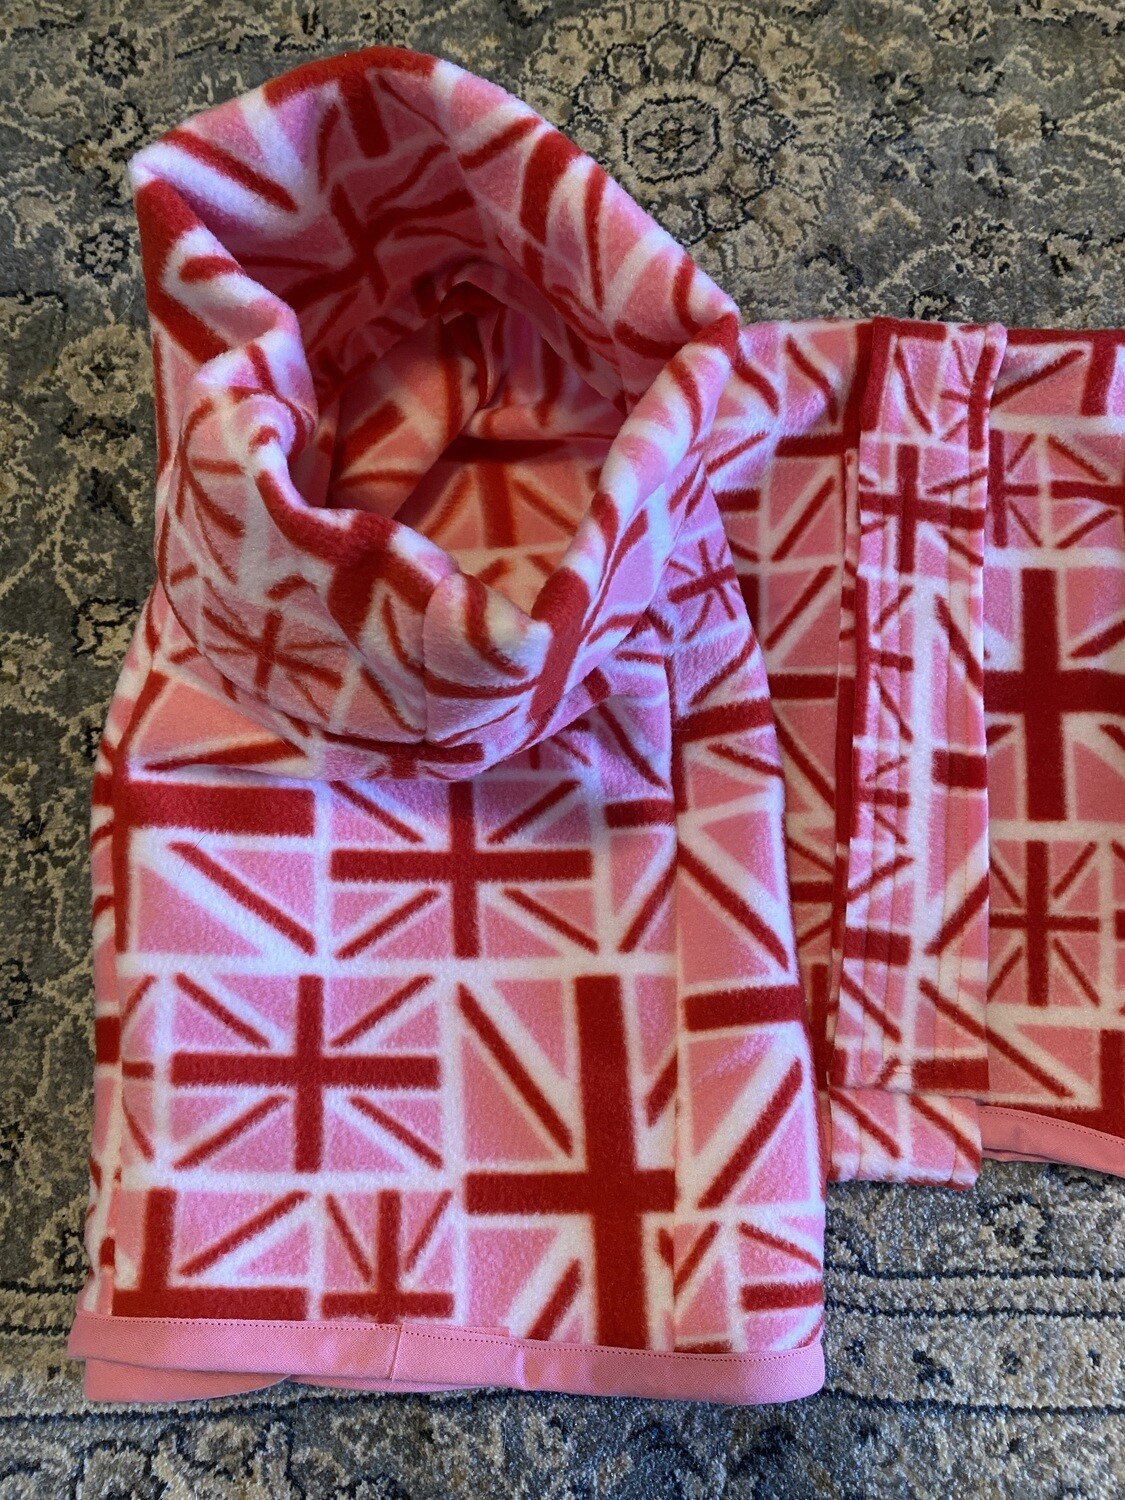 HANDMADE WITH LOVE -  Union Jack Red, Pink & White Fleece - Large Whippet, Lurcher and Greyhound PJ's